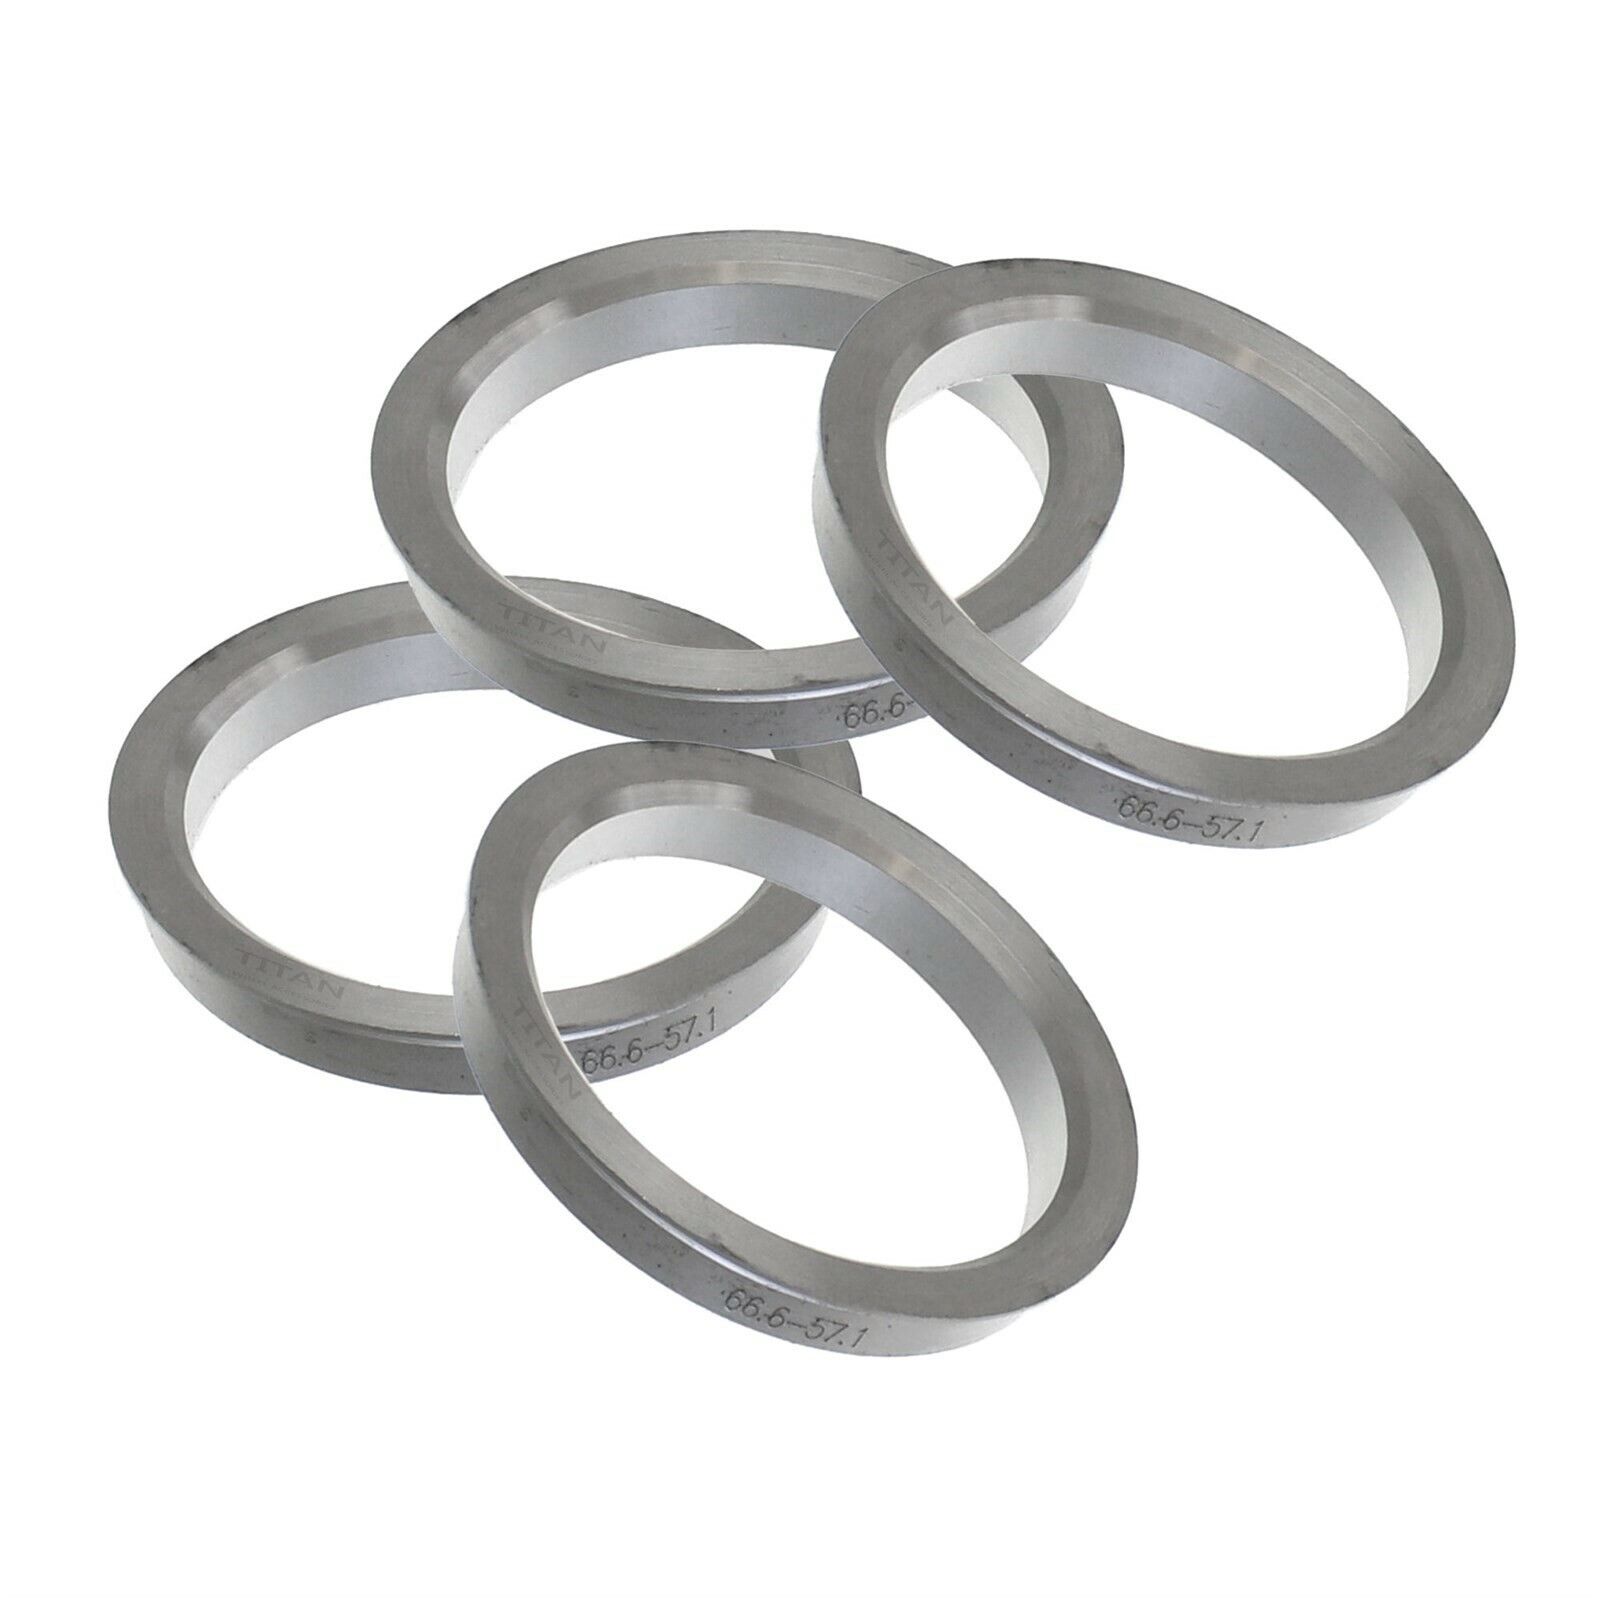 4pcs Aluminum Hubcentric Rings 66.6mm to 57.1mm | 66.56 - 57 fits VW Audi